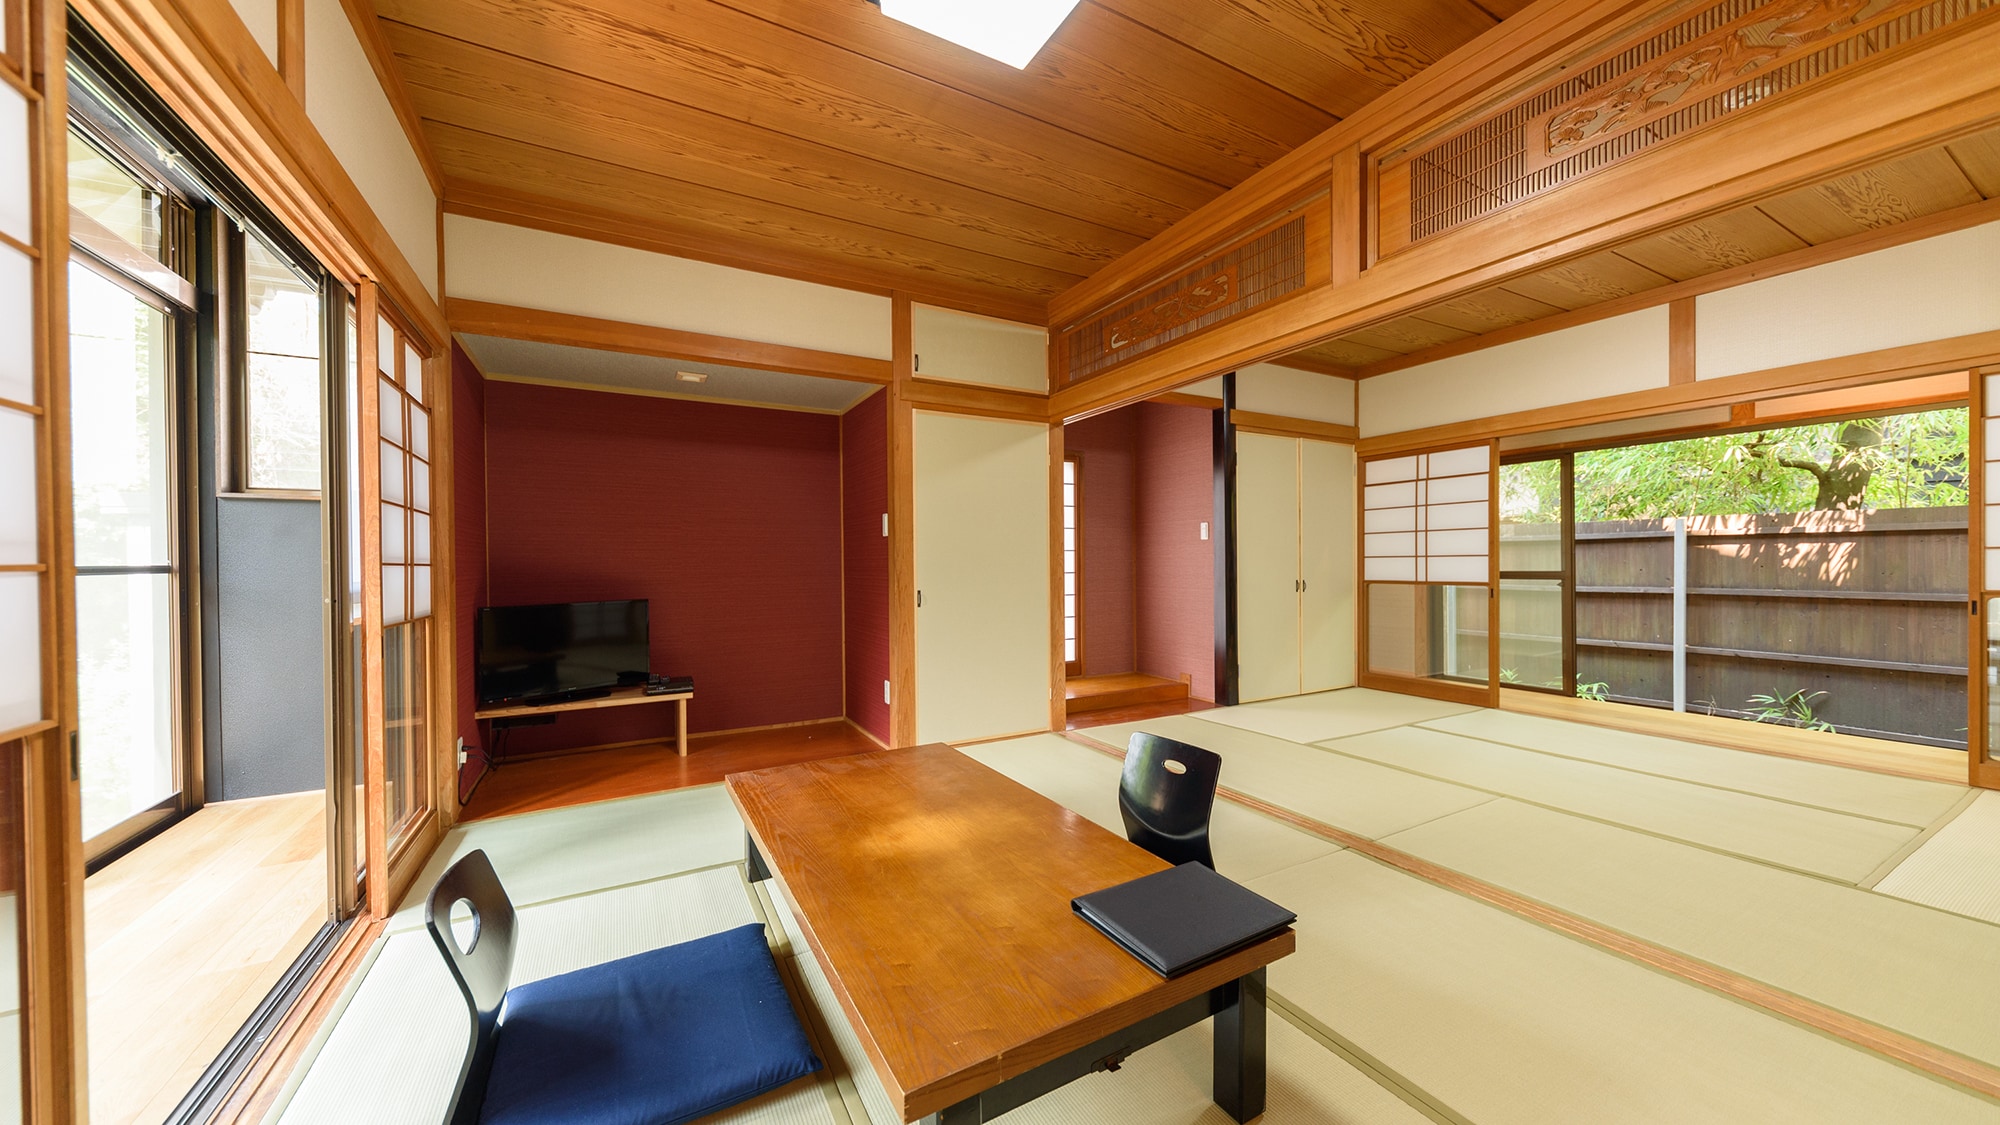 Annex 1st floor: Japanese and Western room with indoor bath [Red]